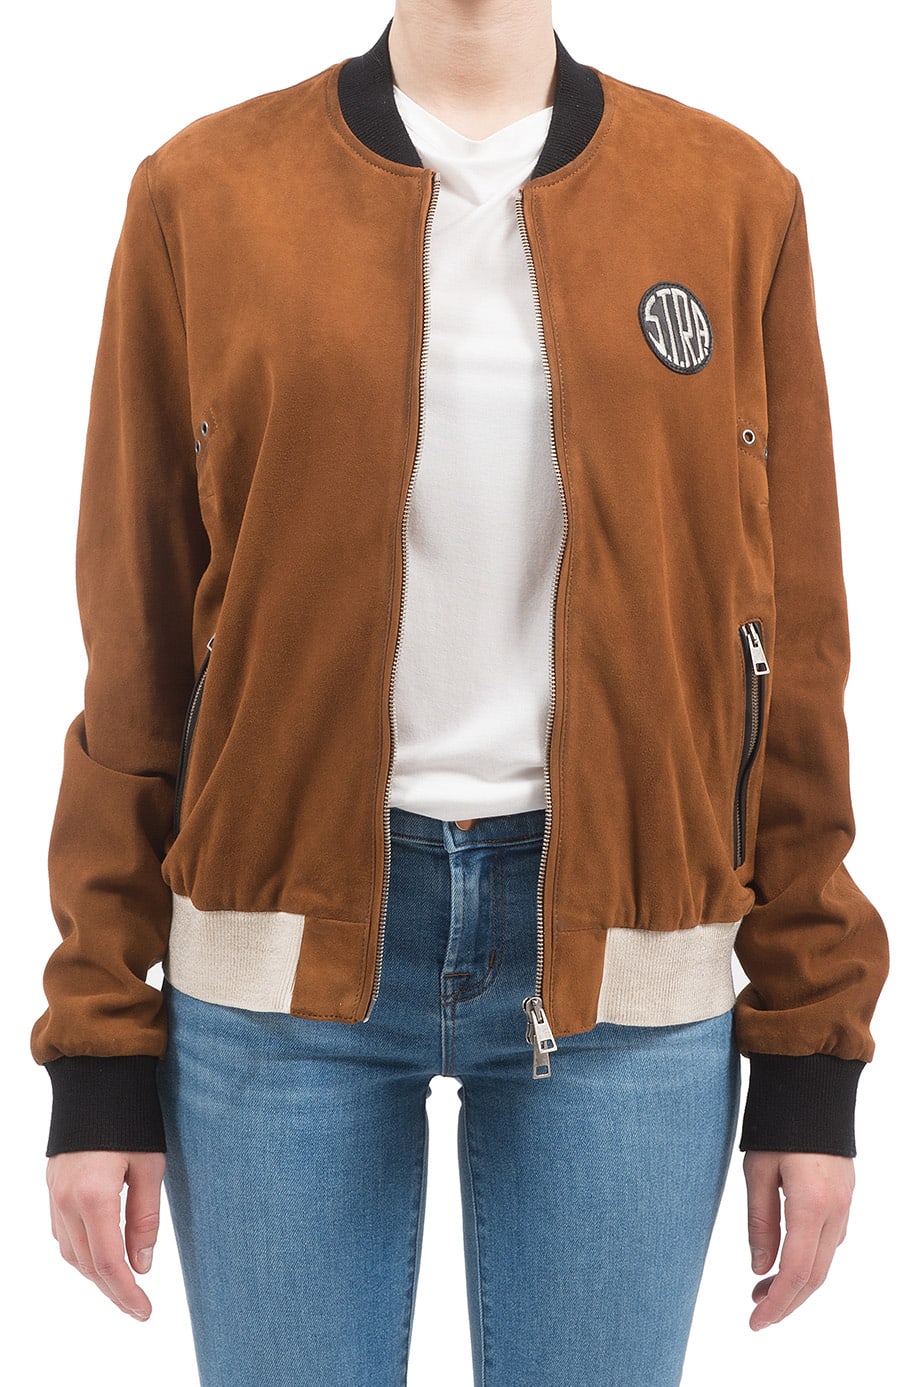 S.t.r.a. - Suede Bomber Jacket